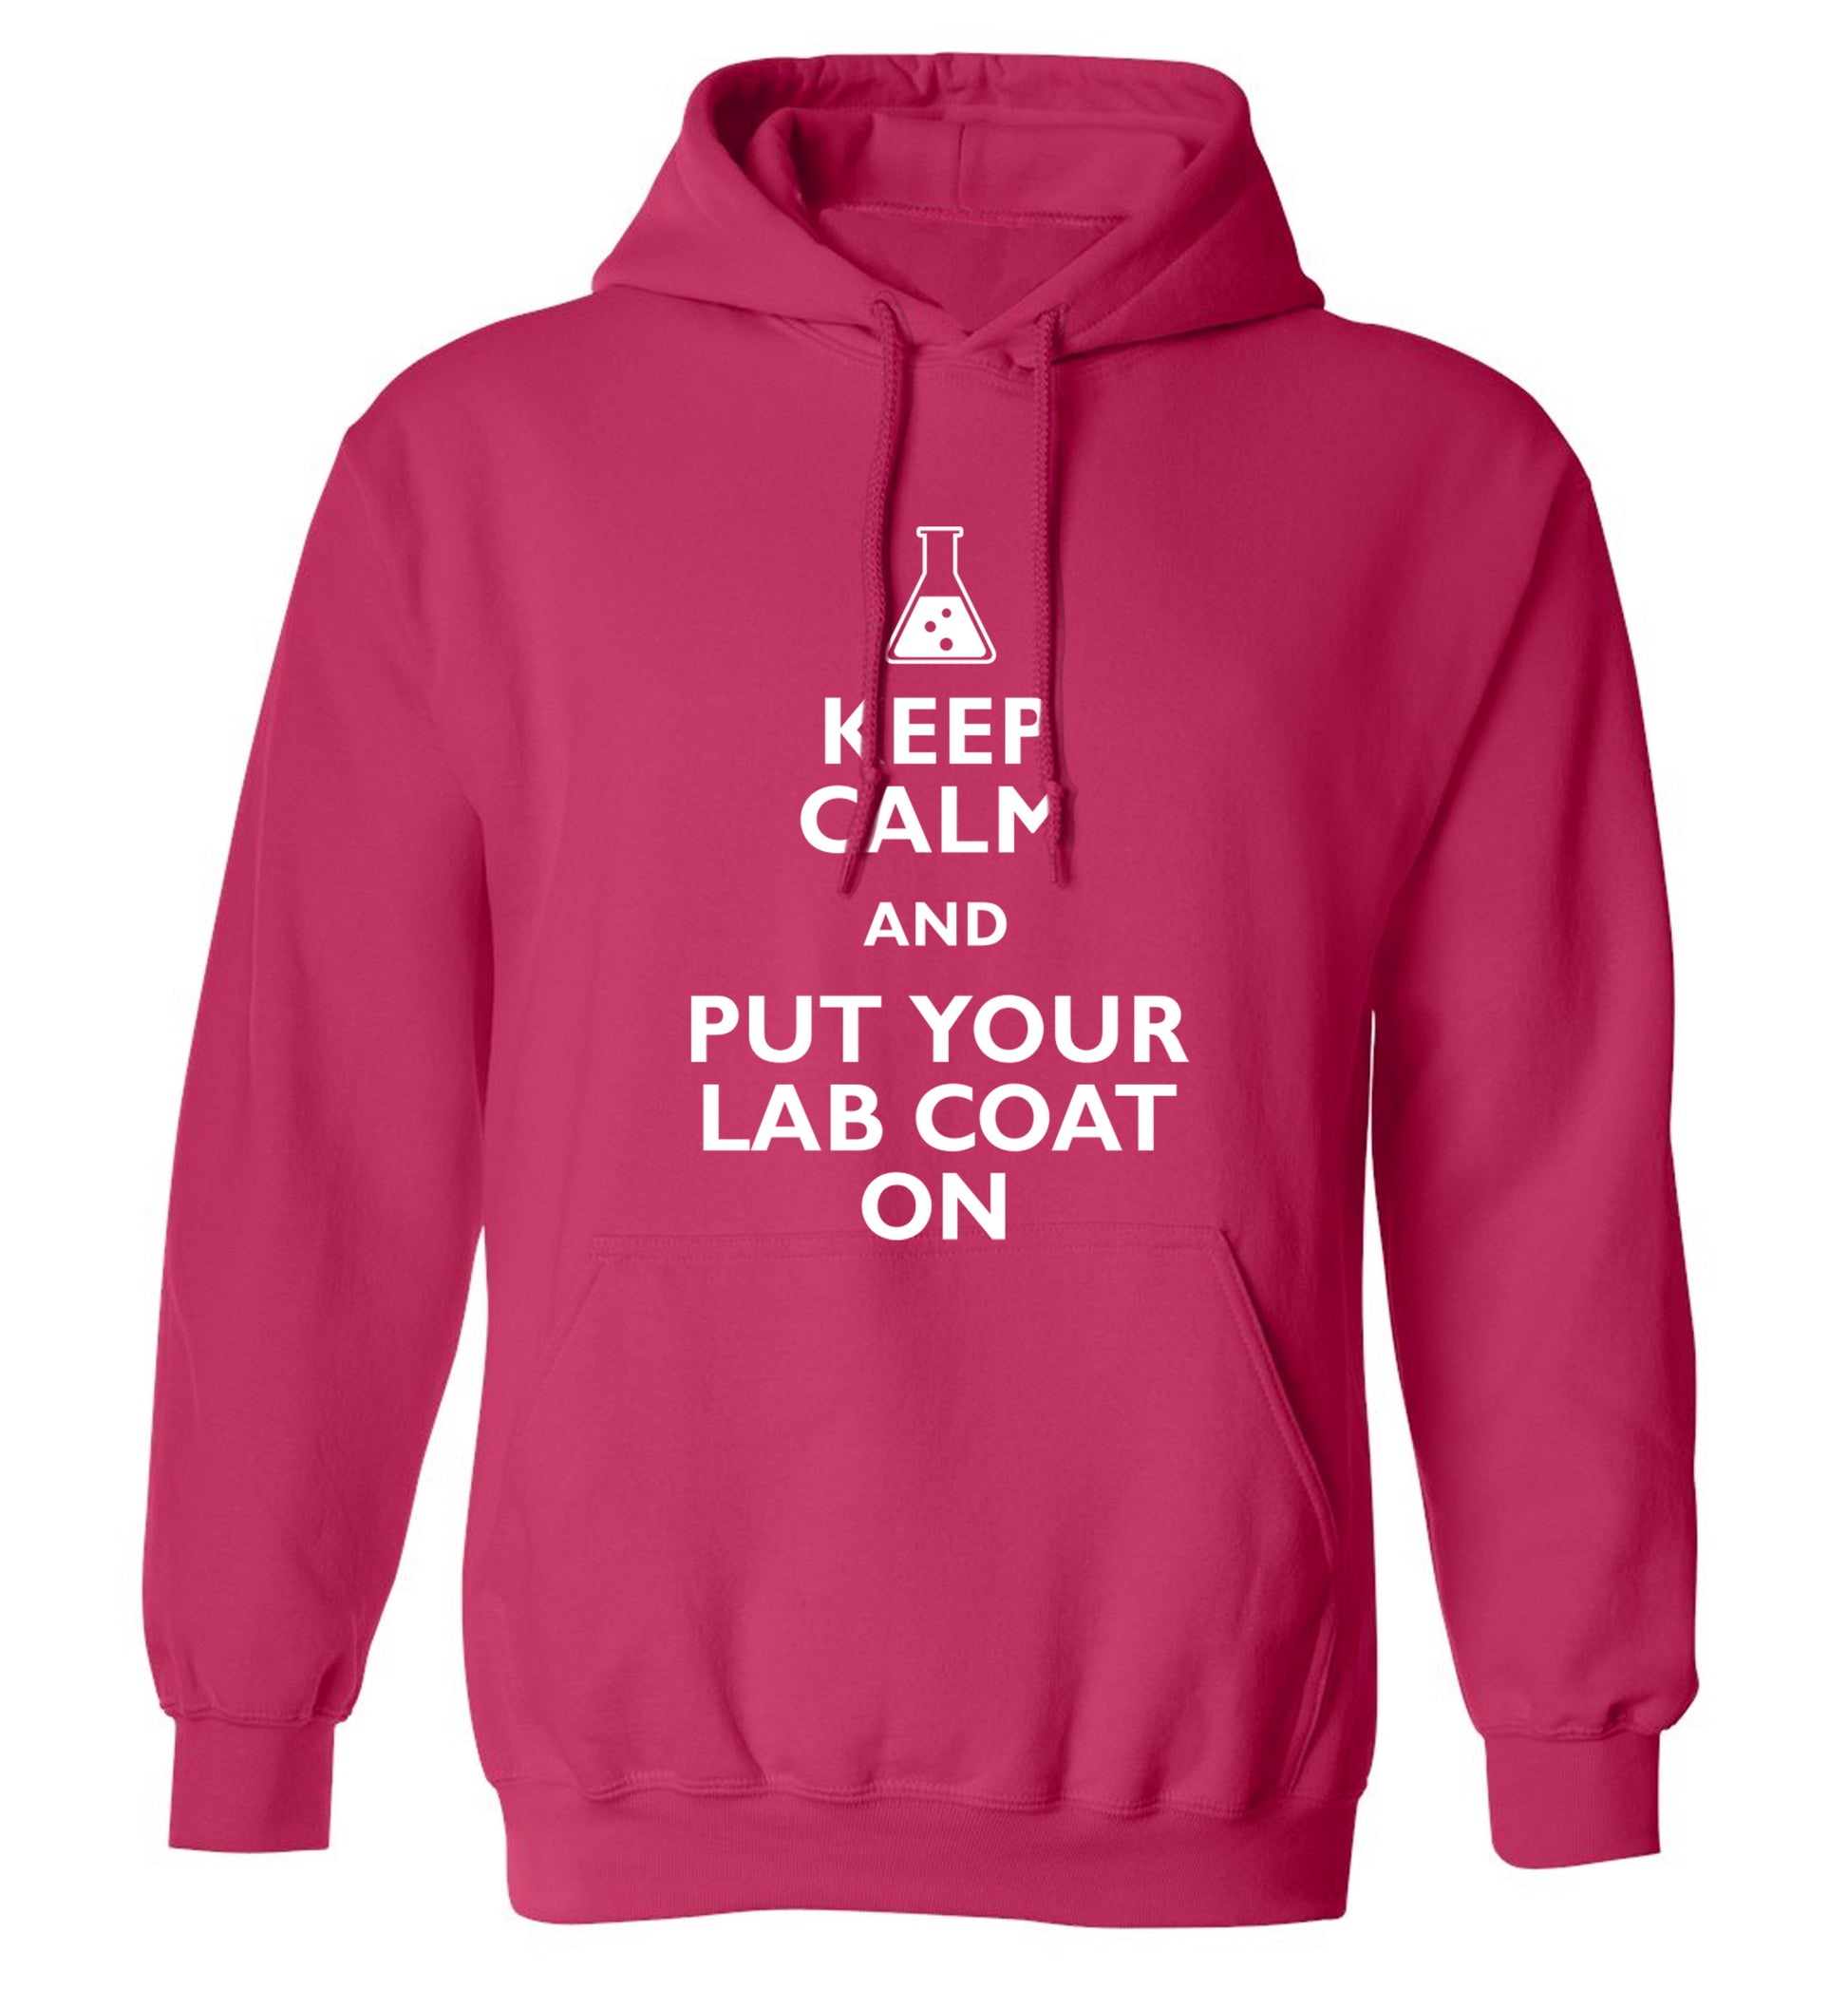 Keep calm and put your lab coat on adults unisex pink hoodie 2XL